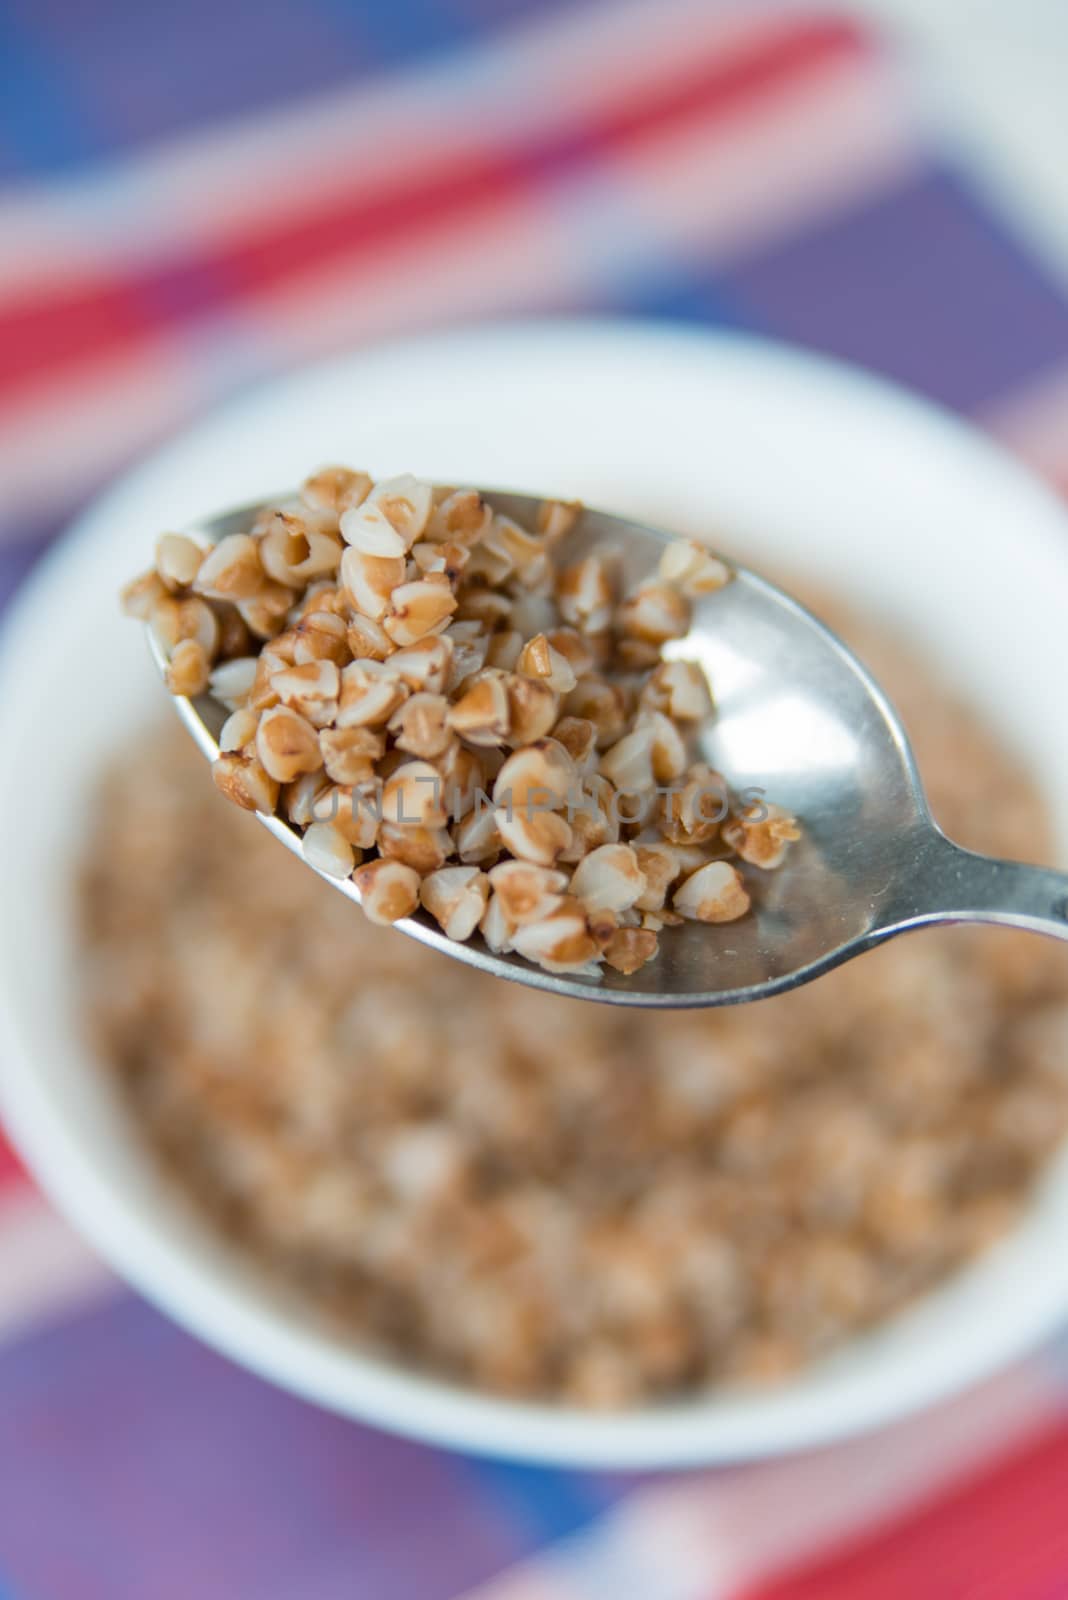 Buckwheat cereal in the spoon by Linaga